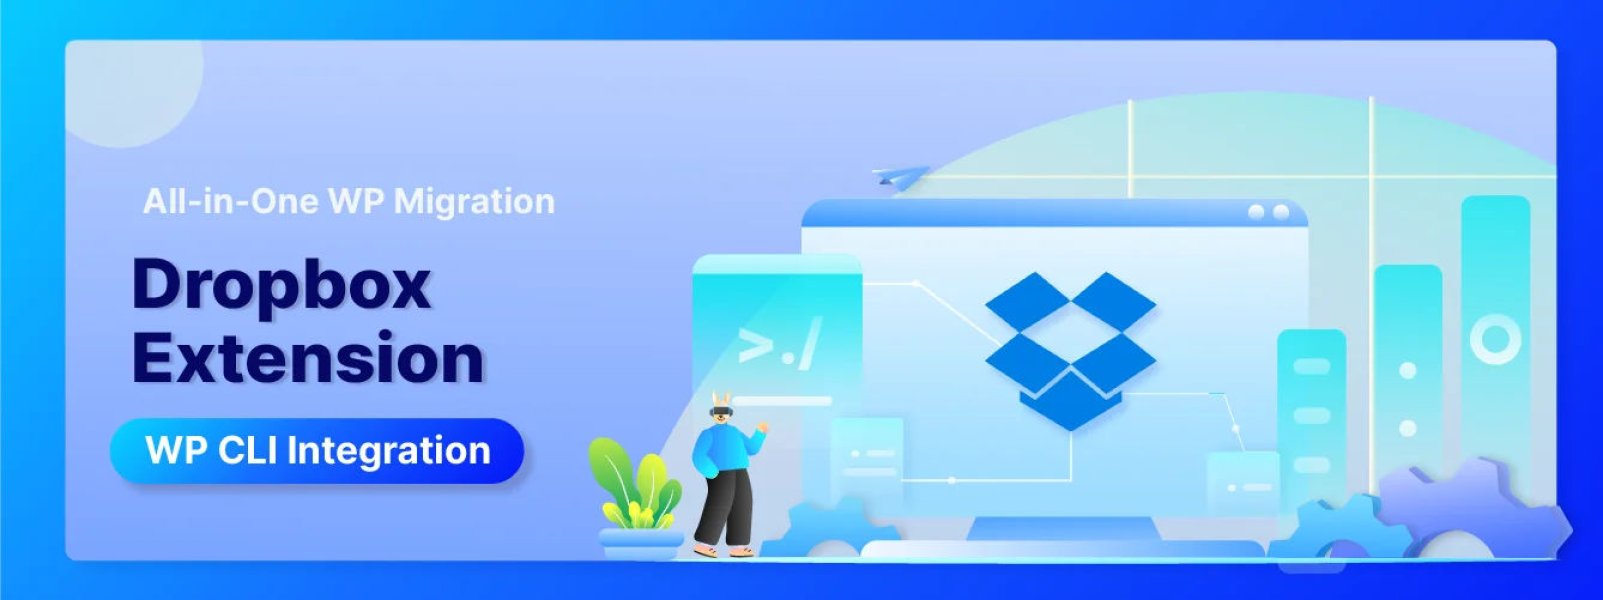 All in One WP Migration Dropbox Extension